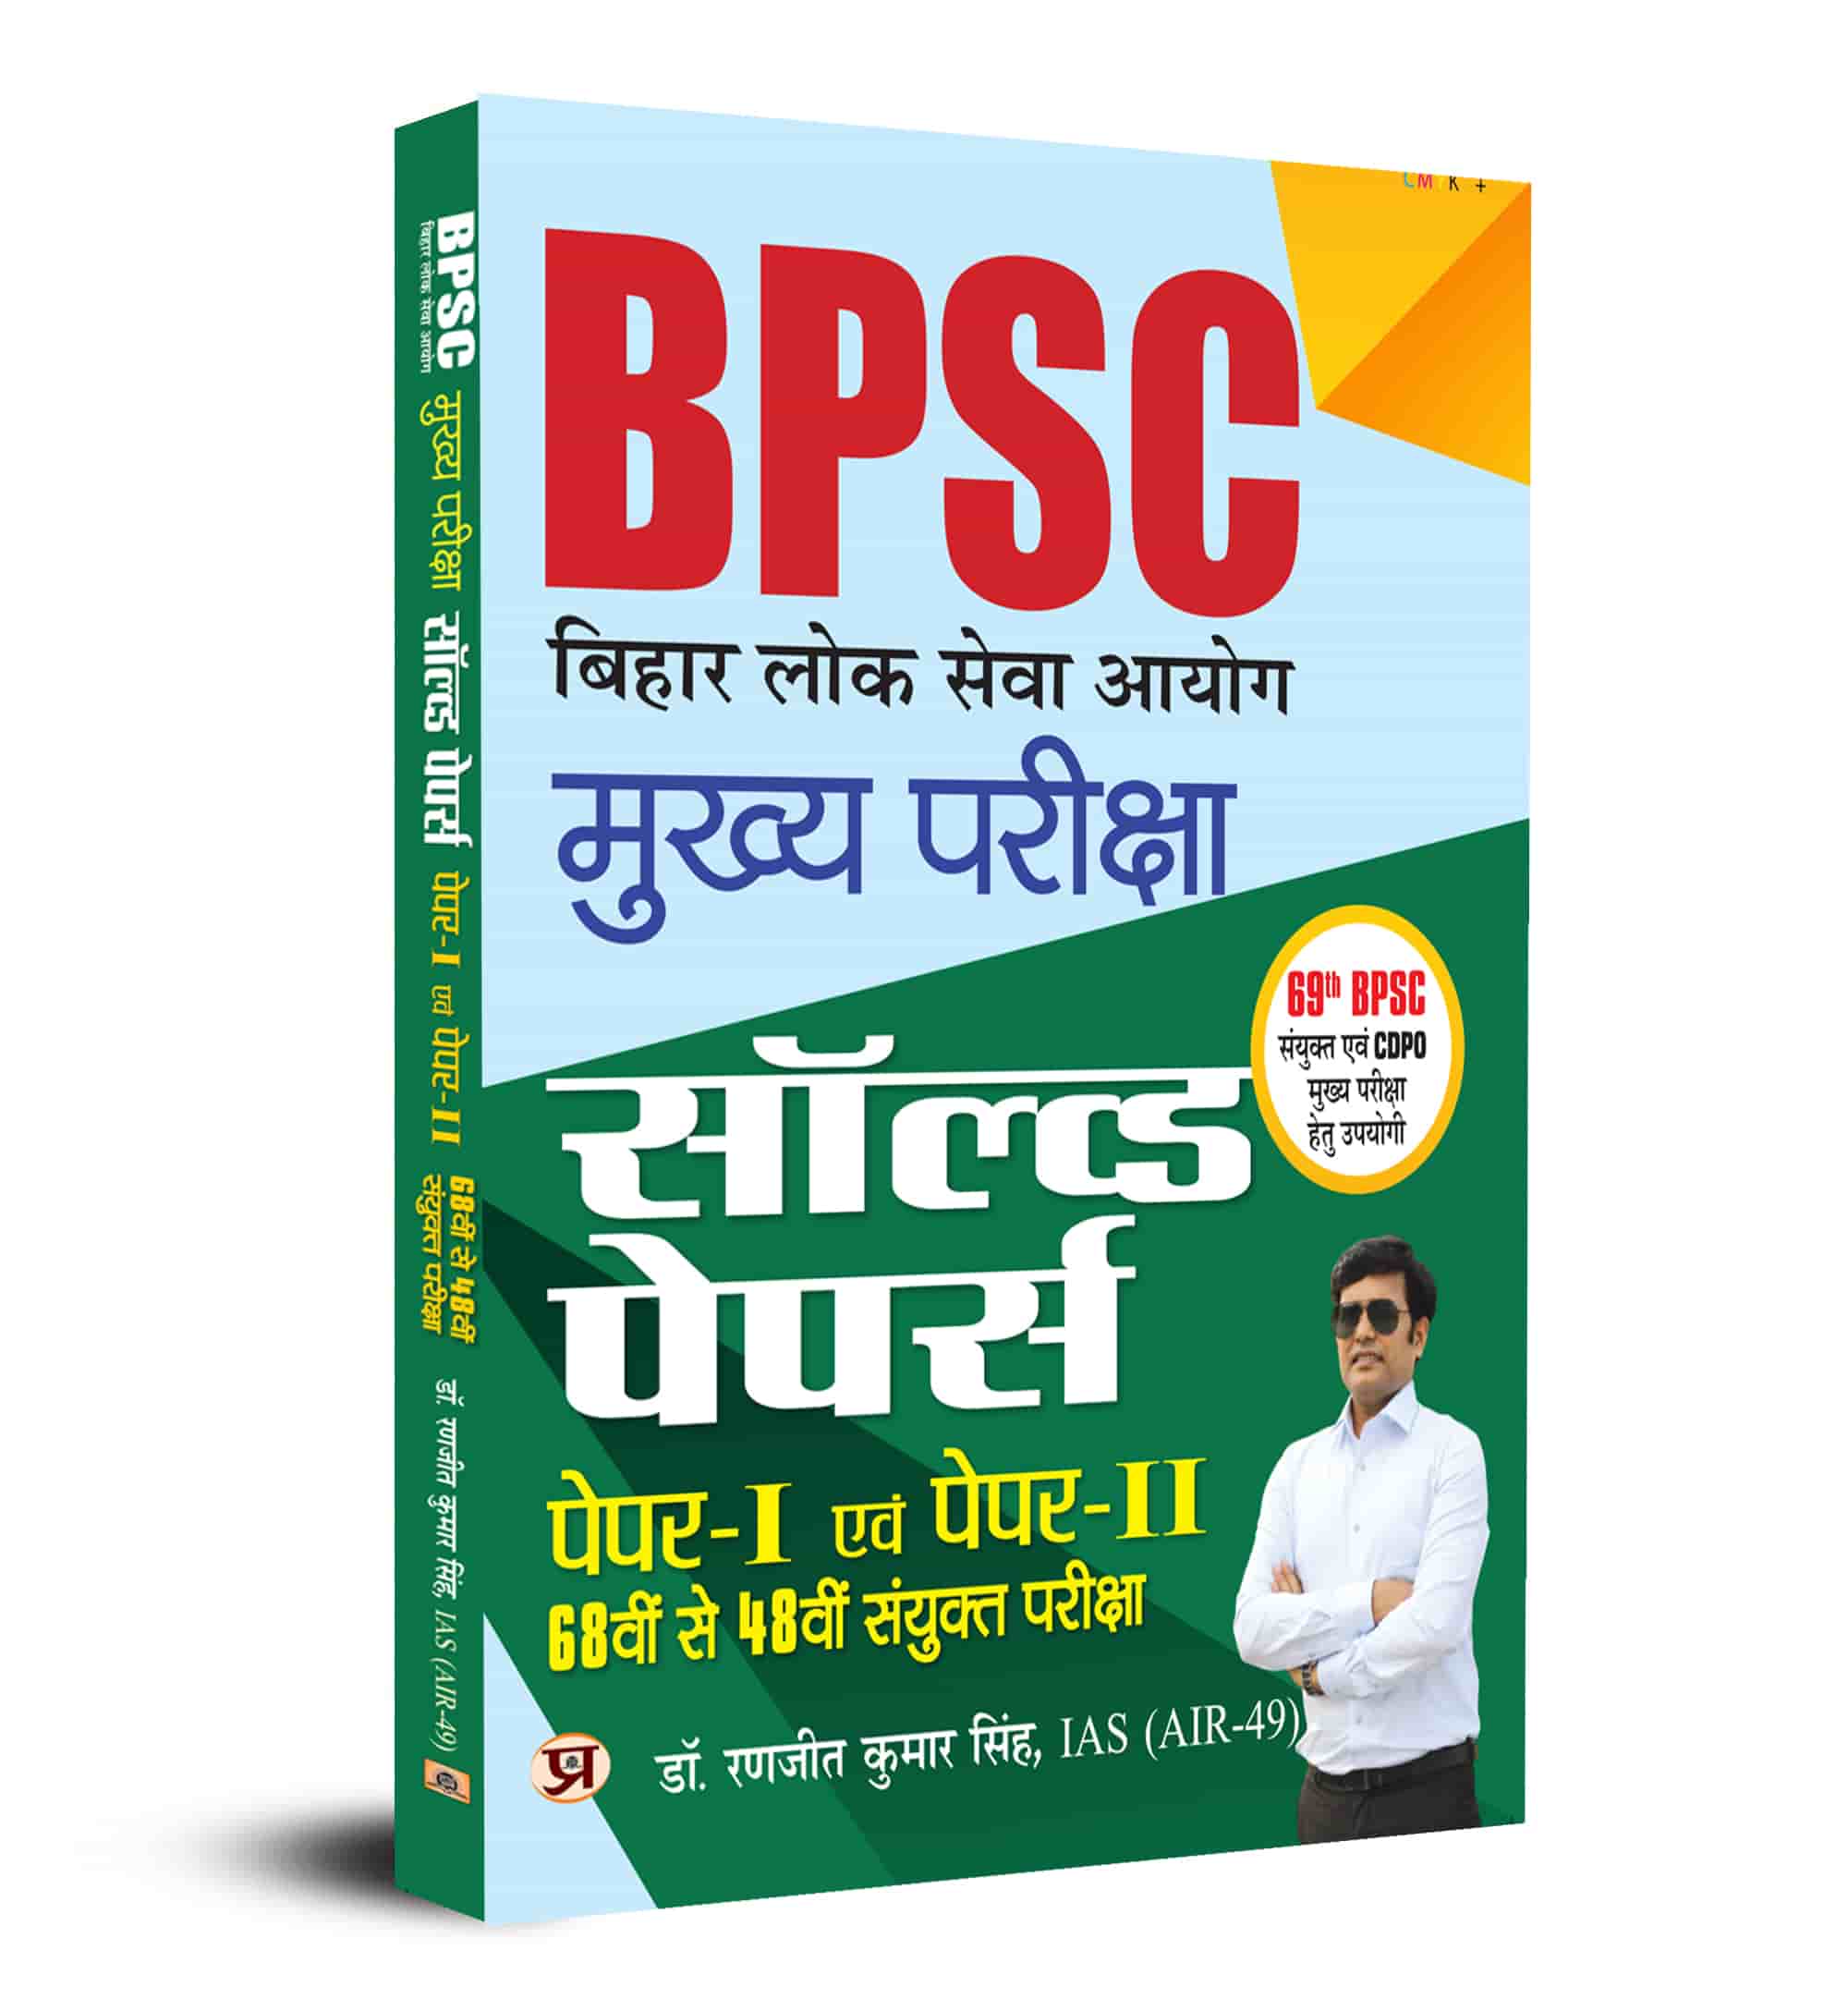 BPSC Mains Solved Papers, Paper I & II, 68th to 48th Examination for 69th BPSC Main Exam in Hindi